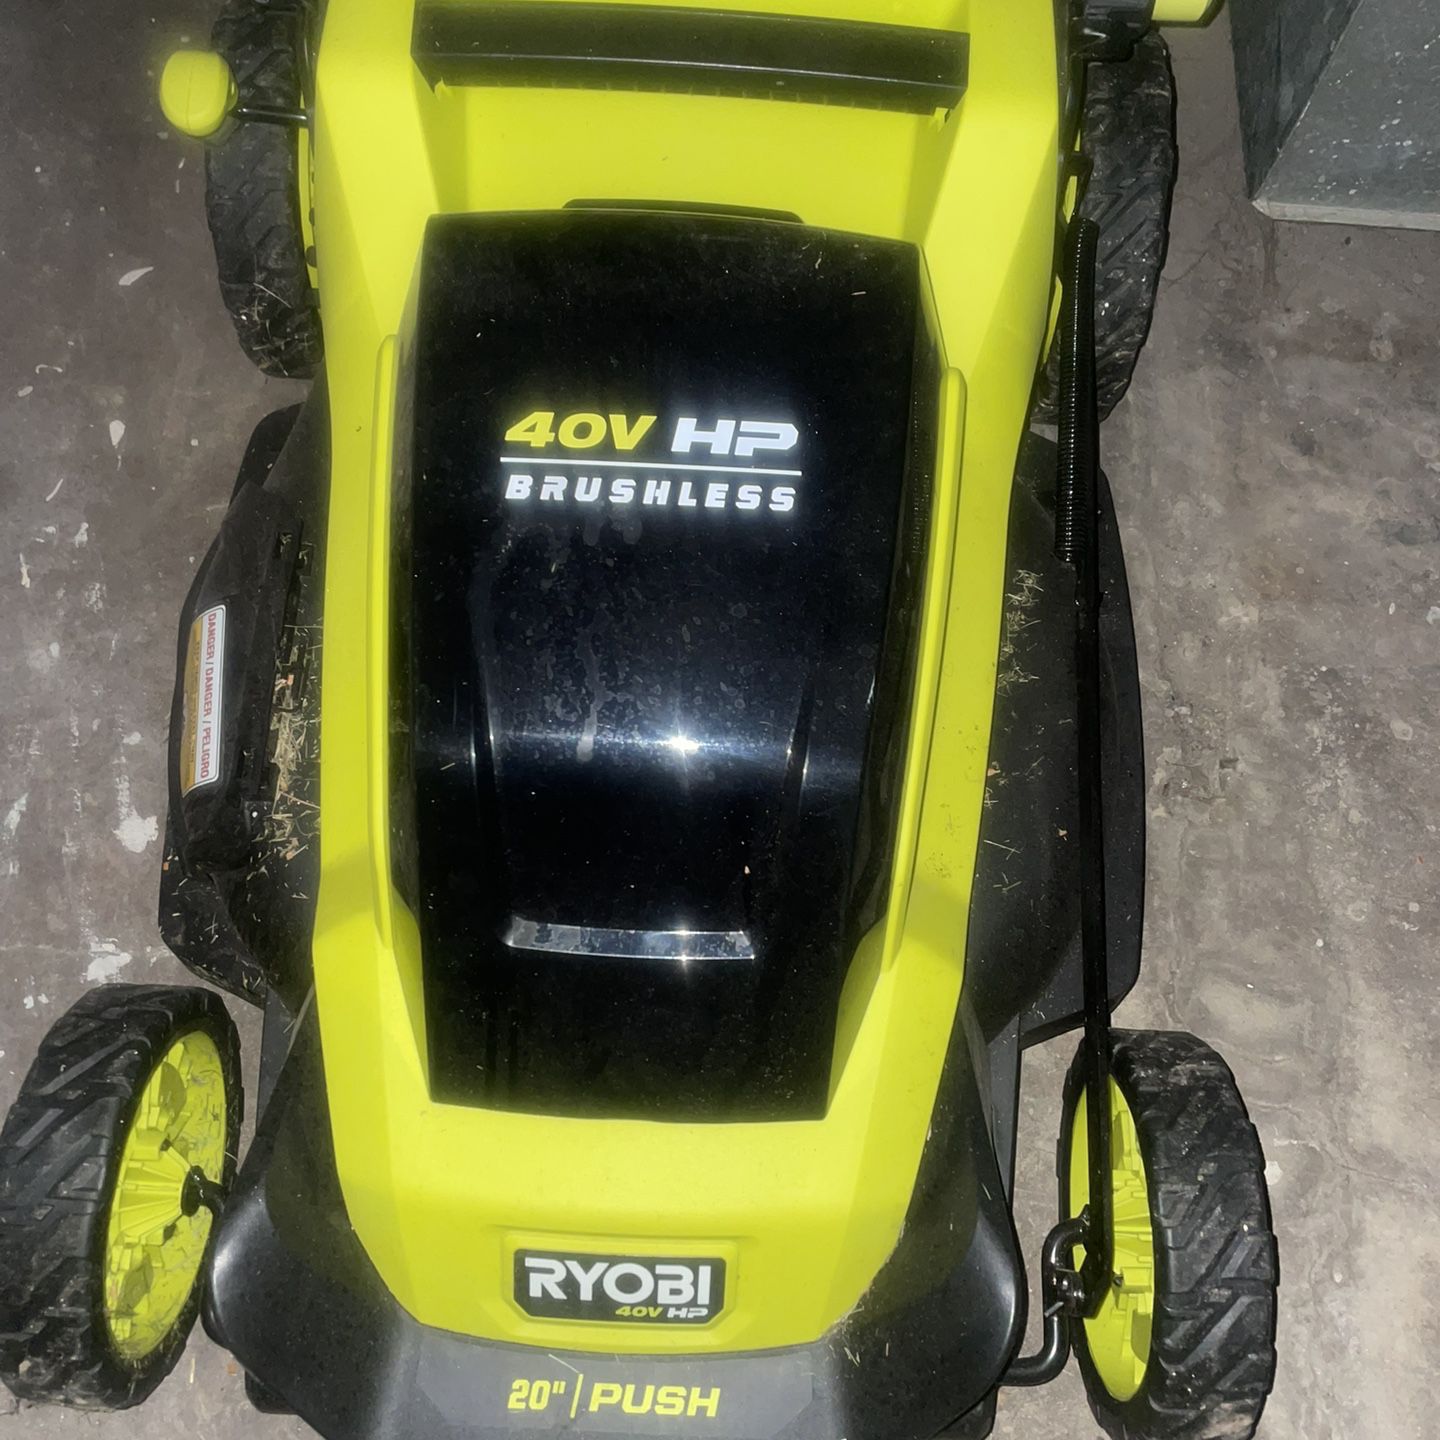 40V HP Brushless 20 in. Cordless Lawnmower (Father’s Day Special)